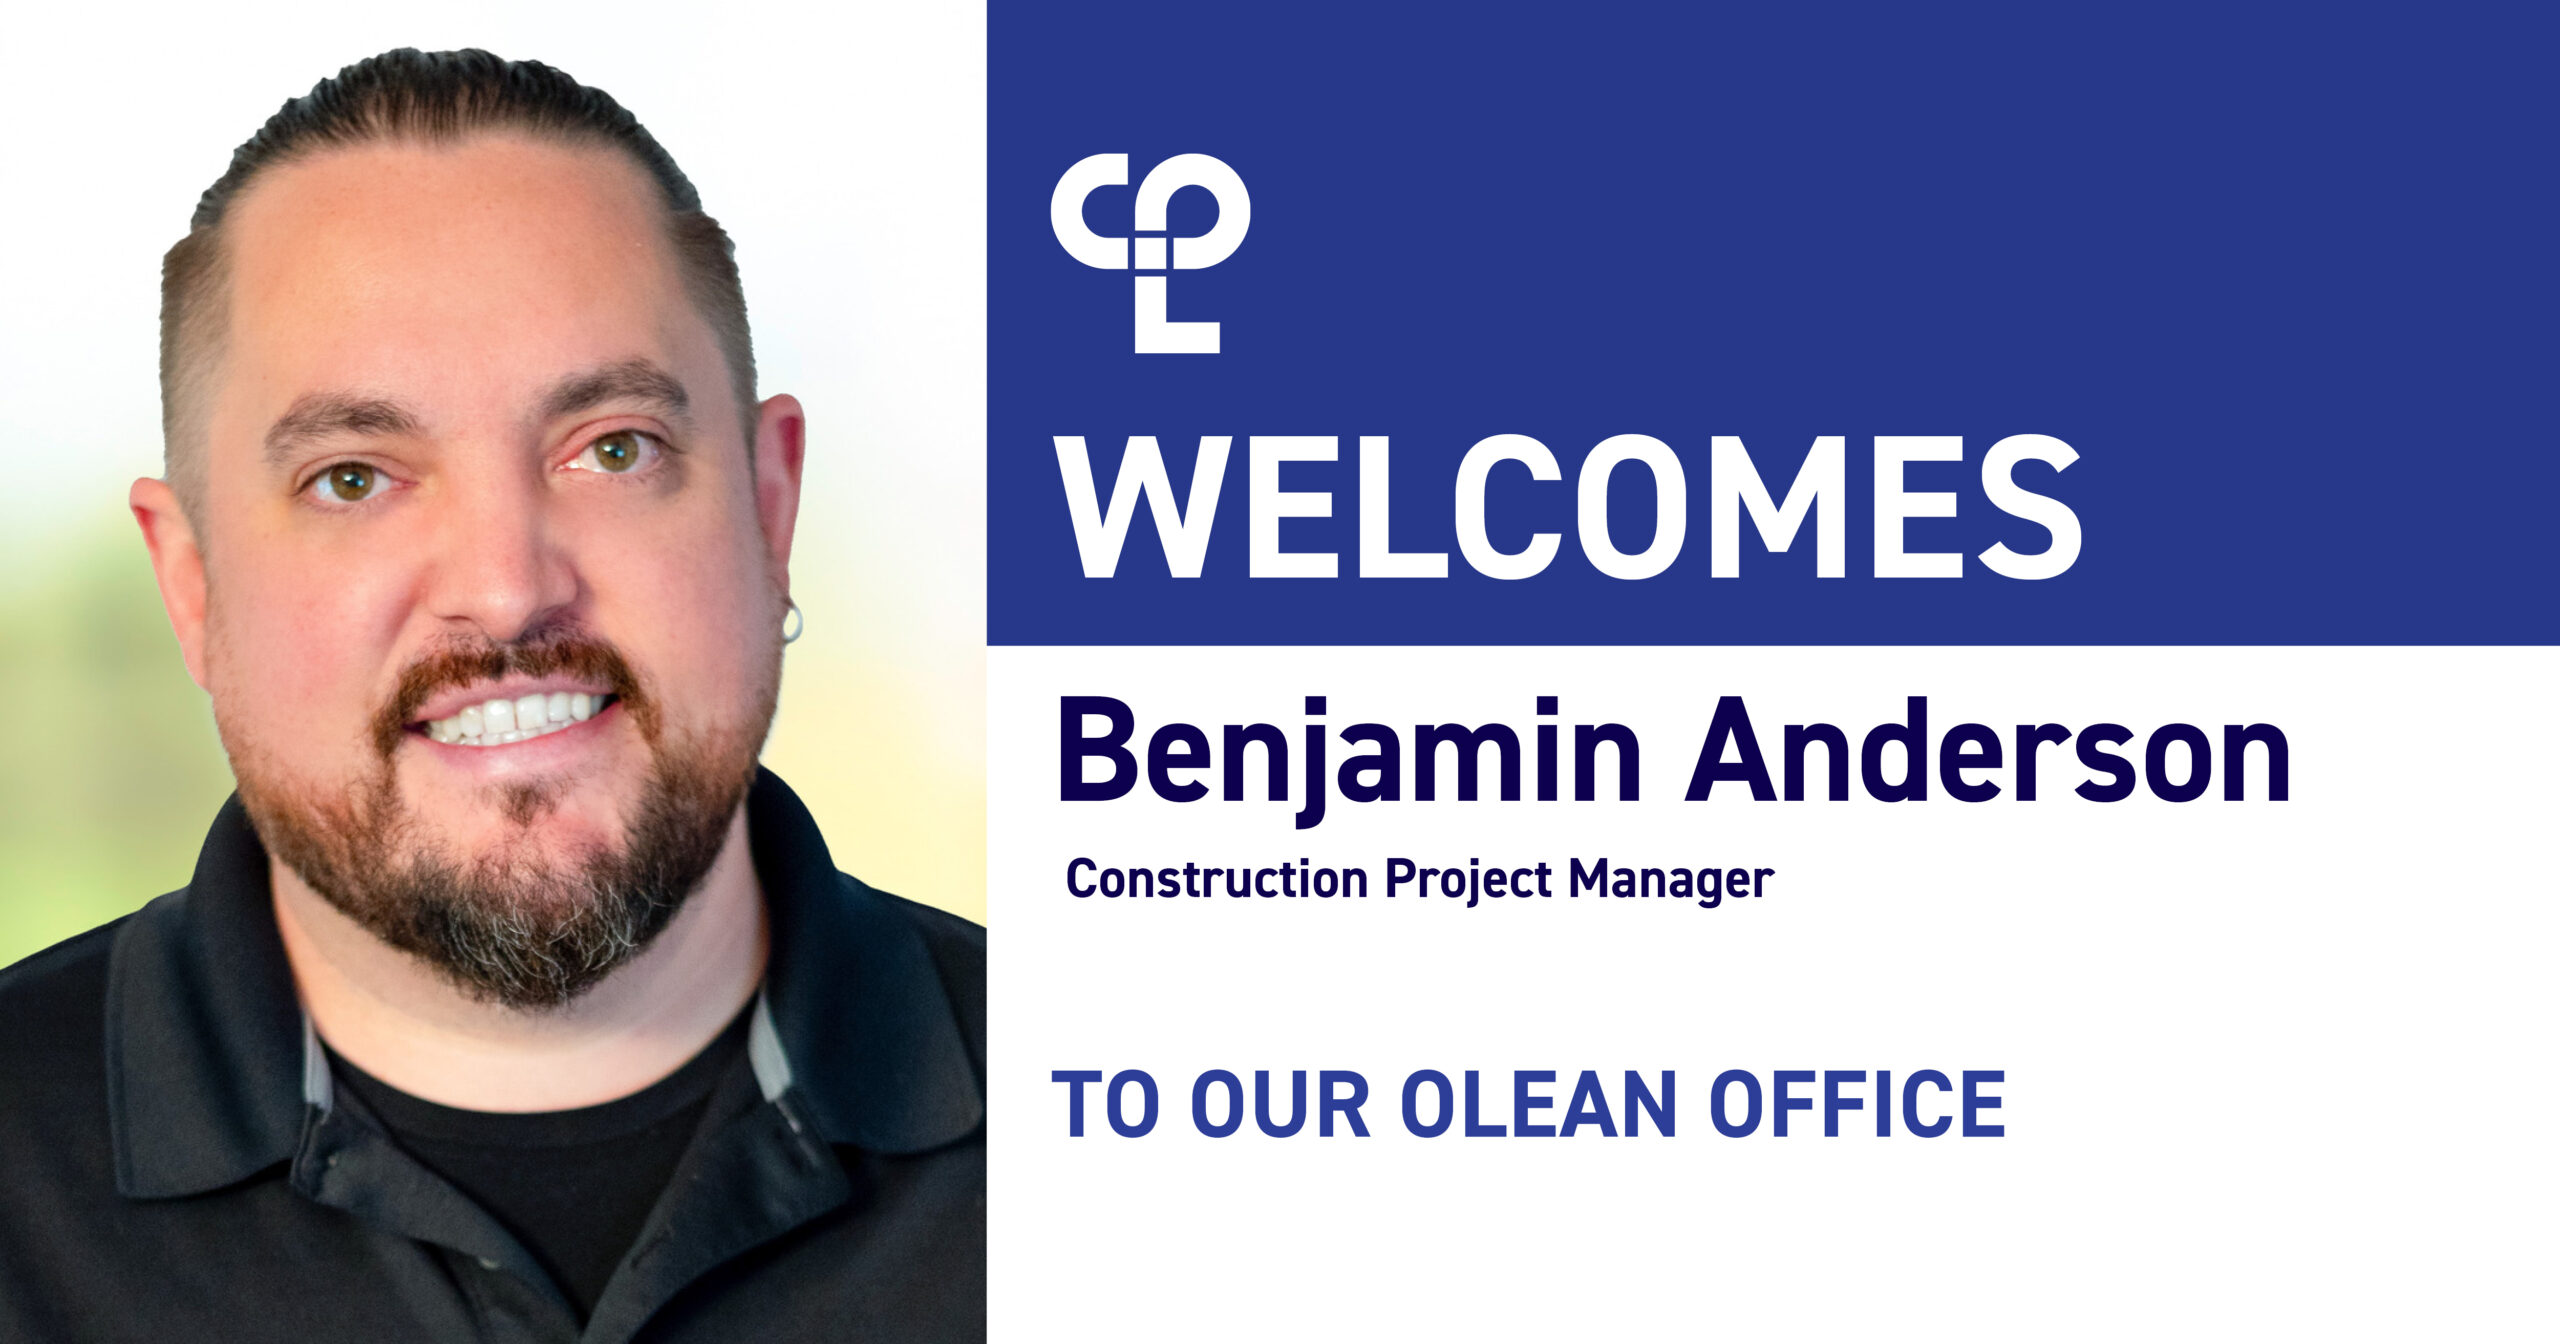 Man wearing black shirt with collar and beard is smiling next to text that reads "CPL Welcomes Benjamin Anderson, Construction Project Manager, to our Olean Office"